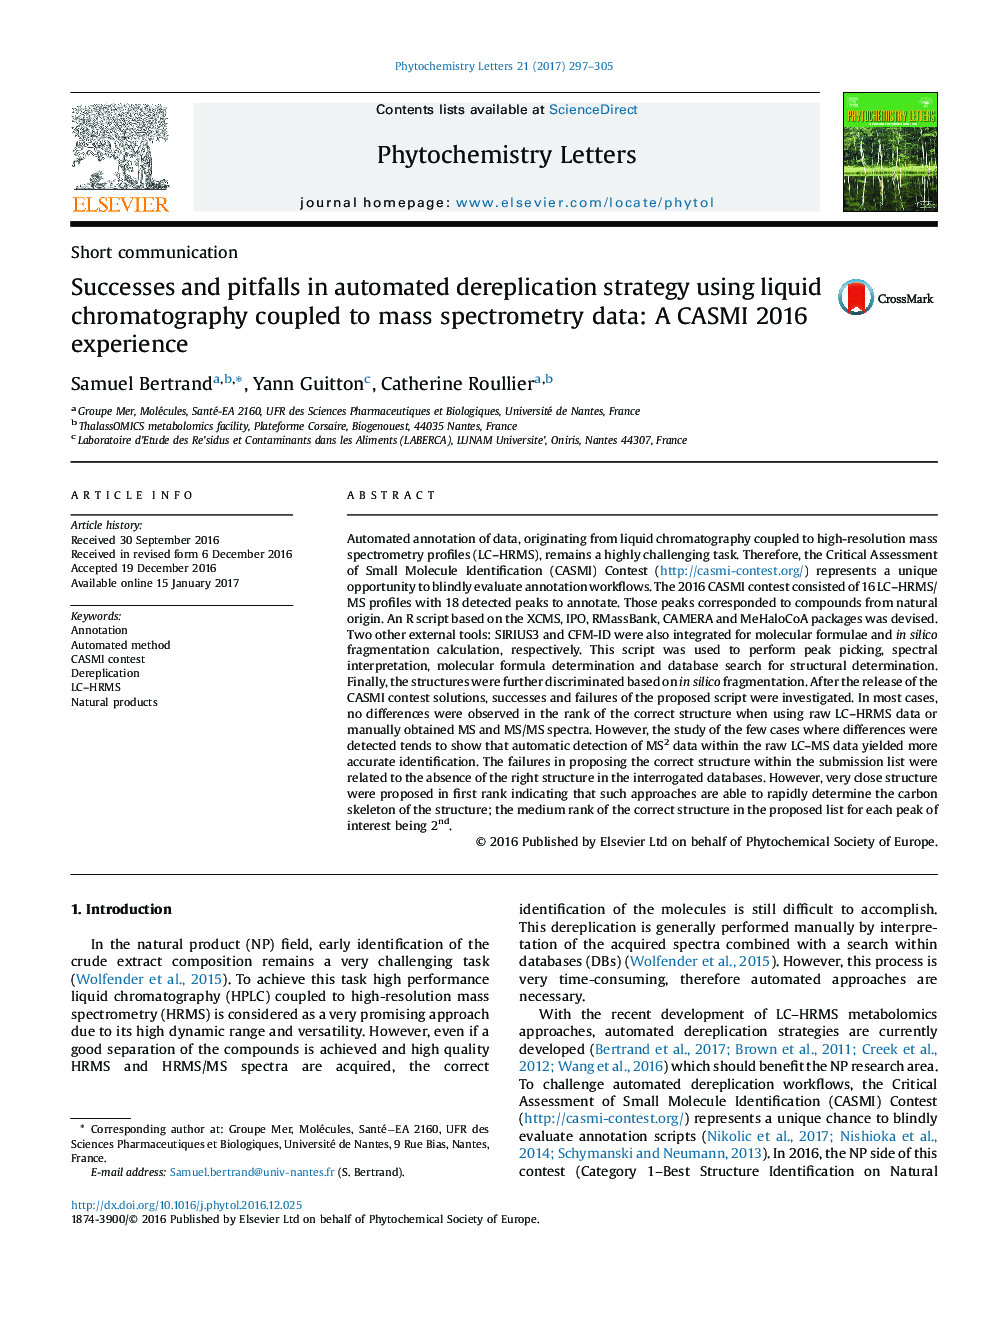 Successes and pitfalls in automated dereplication strategy using liquid chromatography coupled to mass spectrometry data: A CASMI 2016 experience